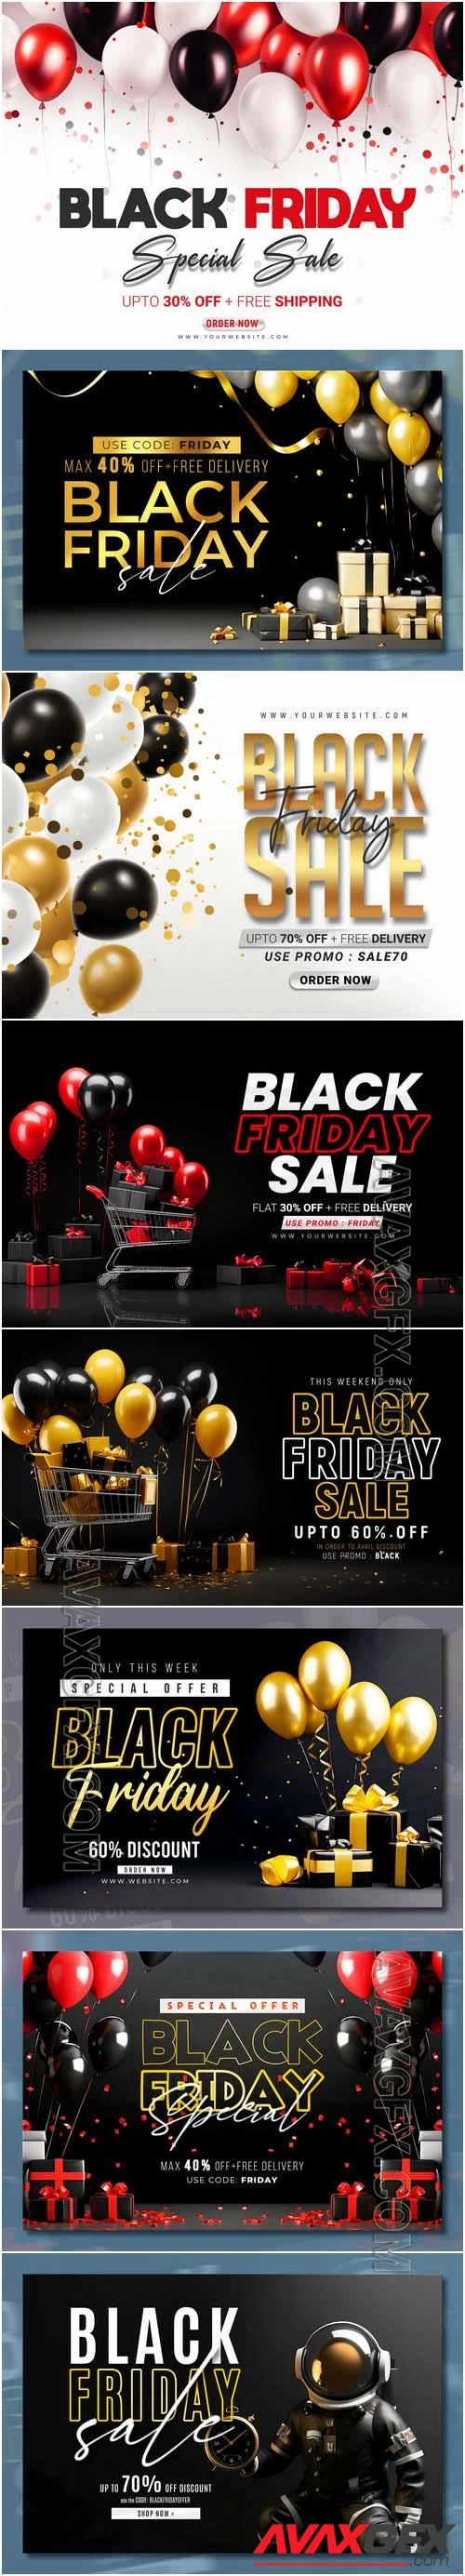 Black friday sale banner with realistic 3d gifts and balloons in psd vol 3